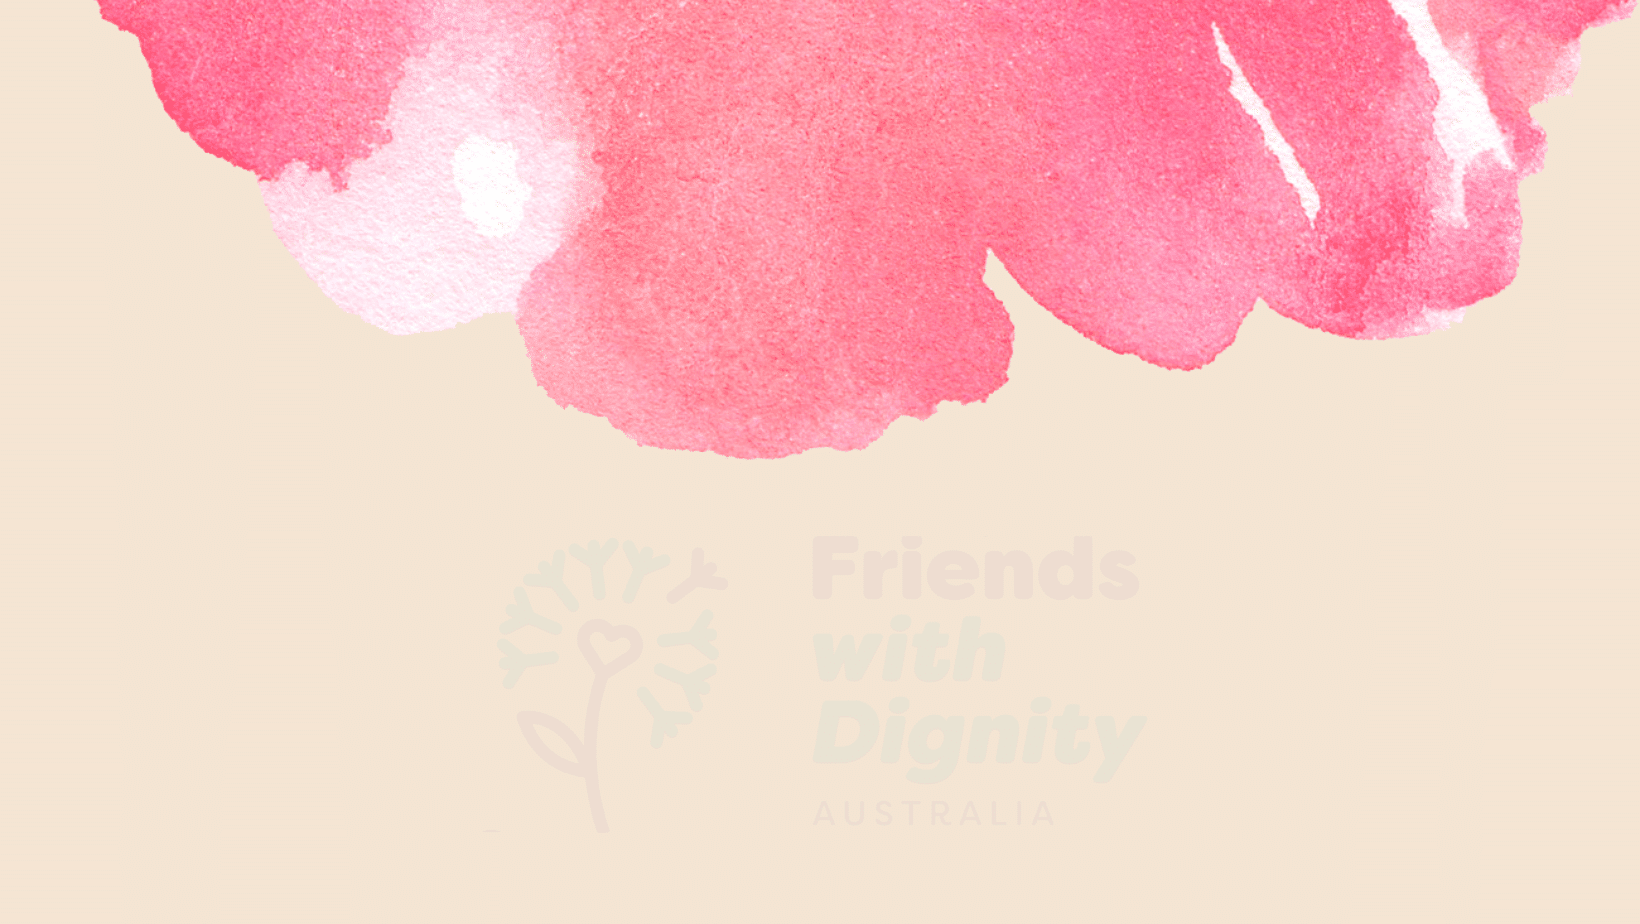 Friends with Dignity